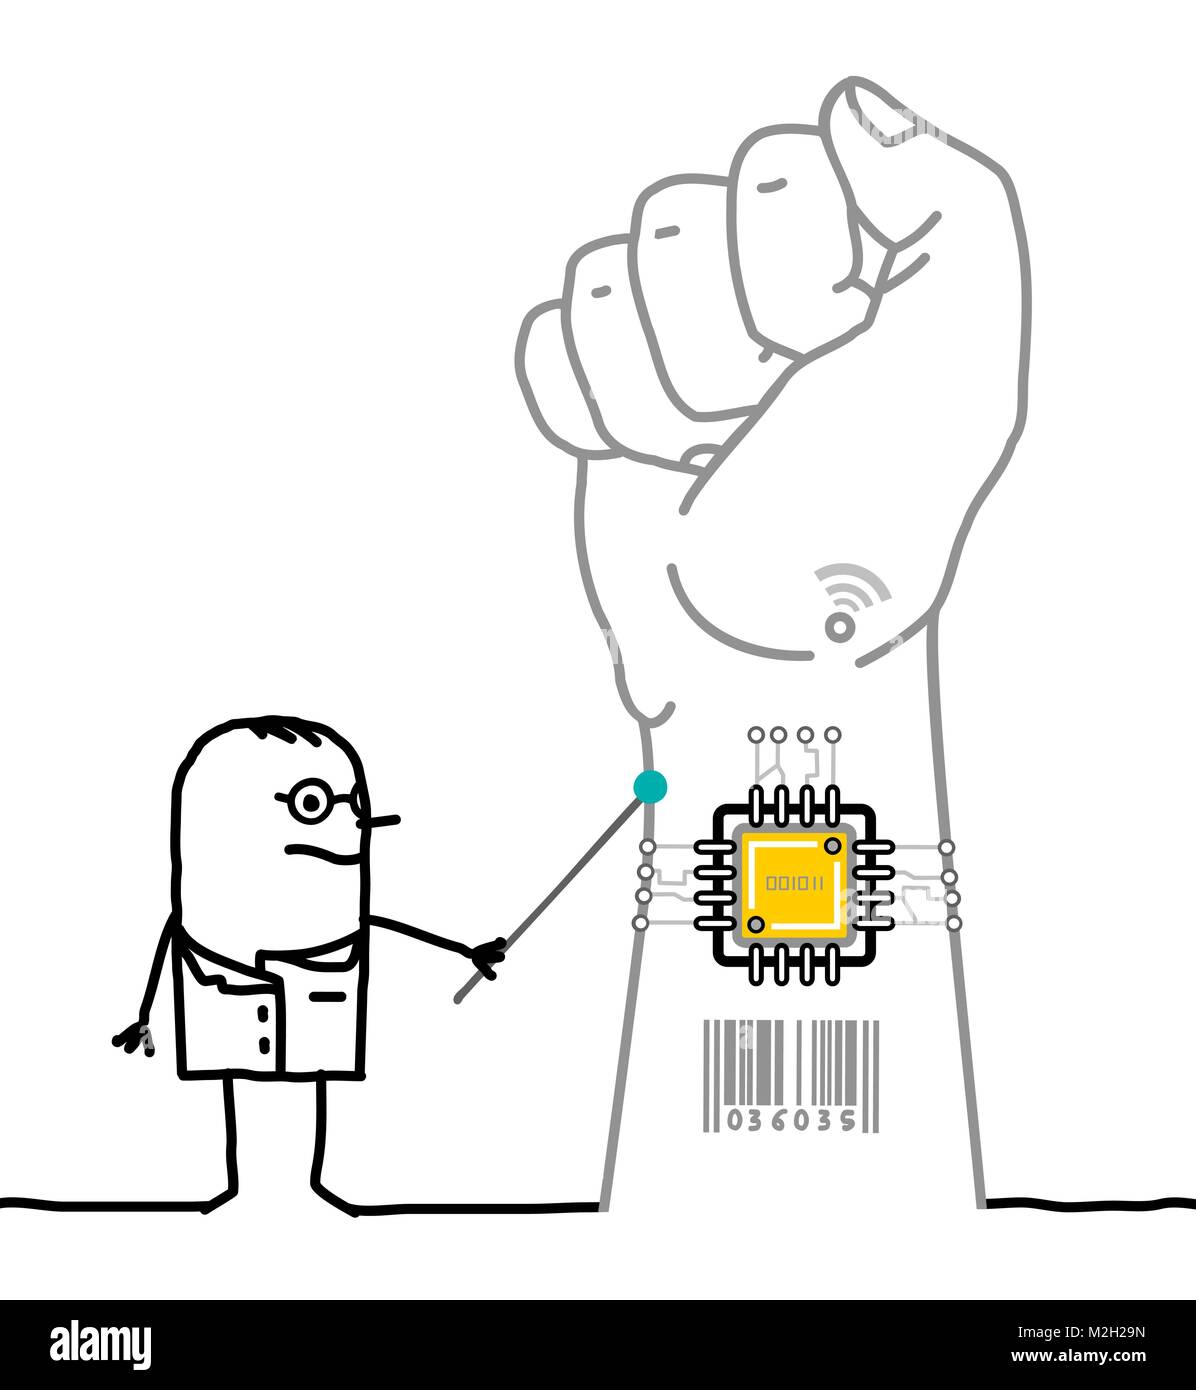 Cartoon Doctor Showing A Microchip Implant in Wrist Stock Vector